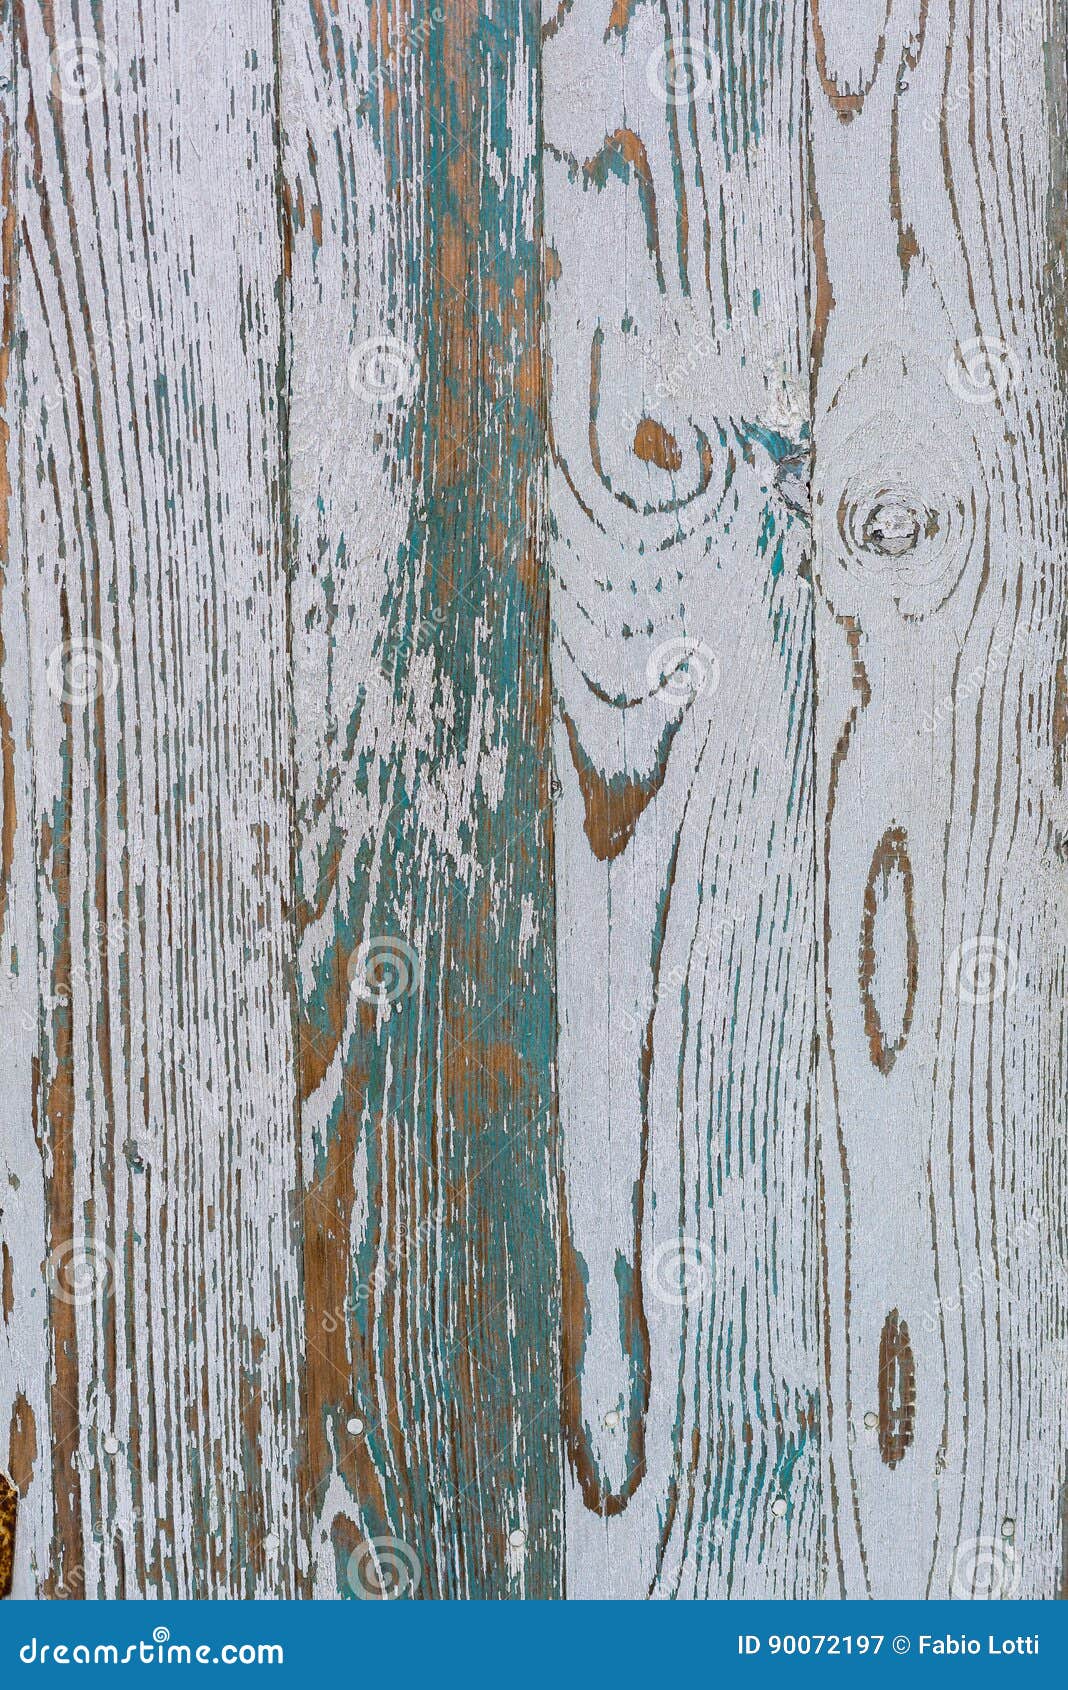 wrecked wood texture